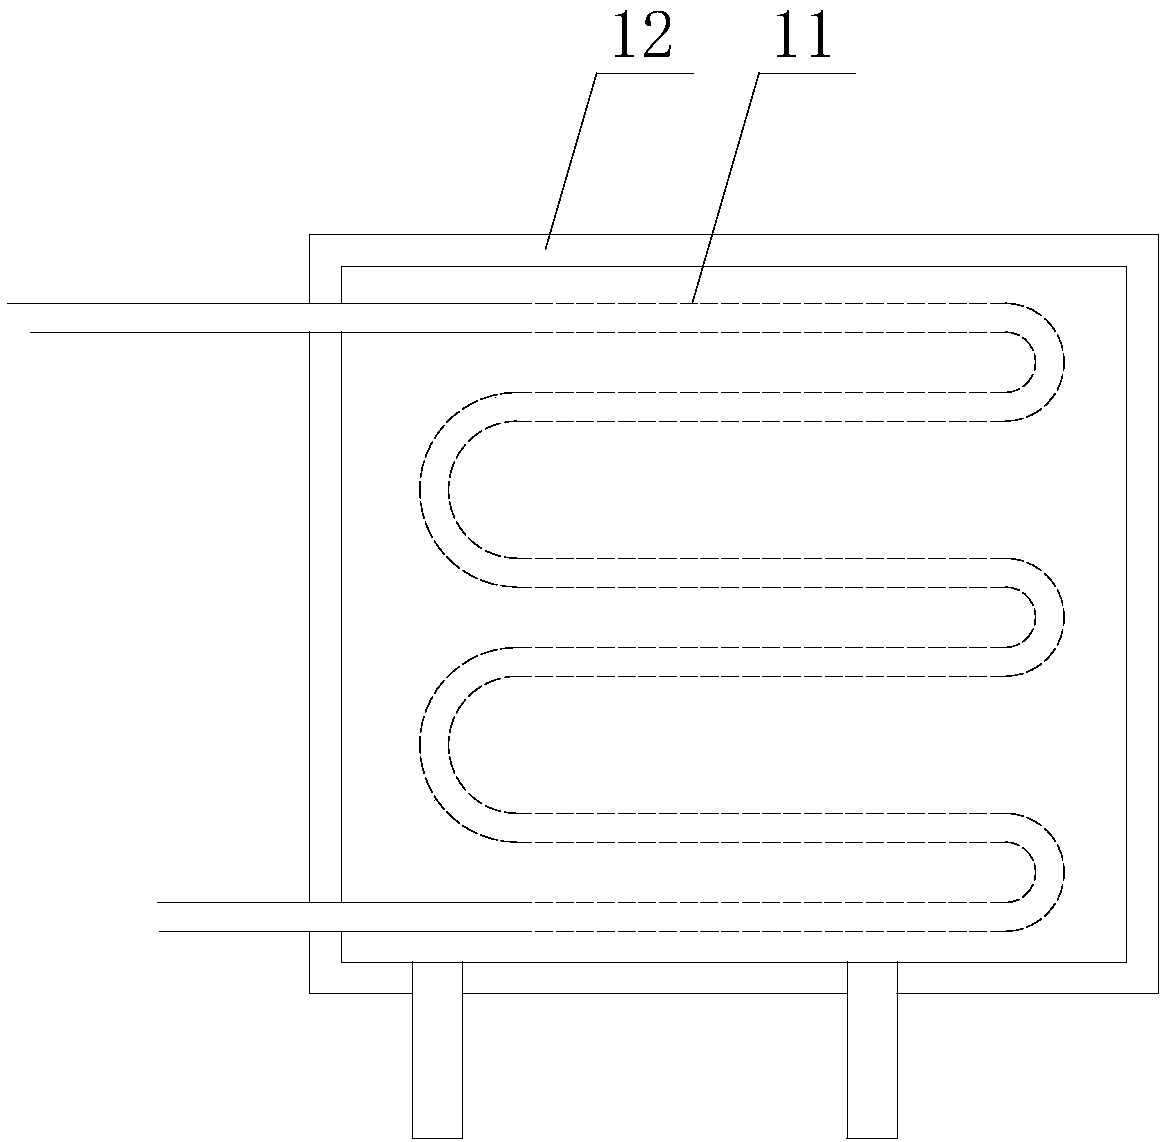 Inserted heat-isolating and cooling mechanism for high-temperature draught fan